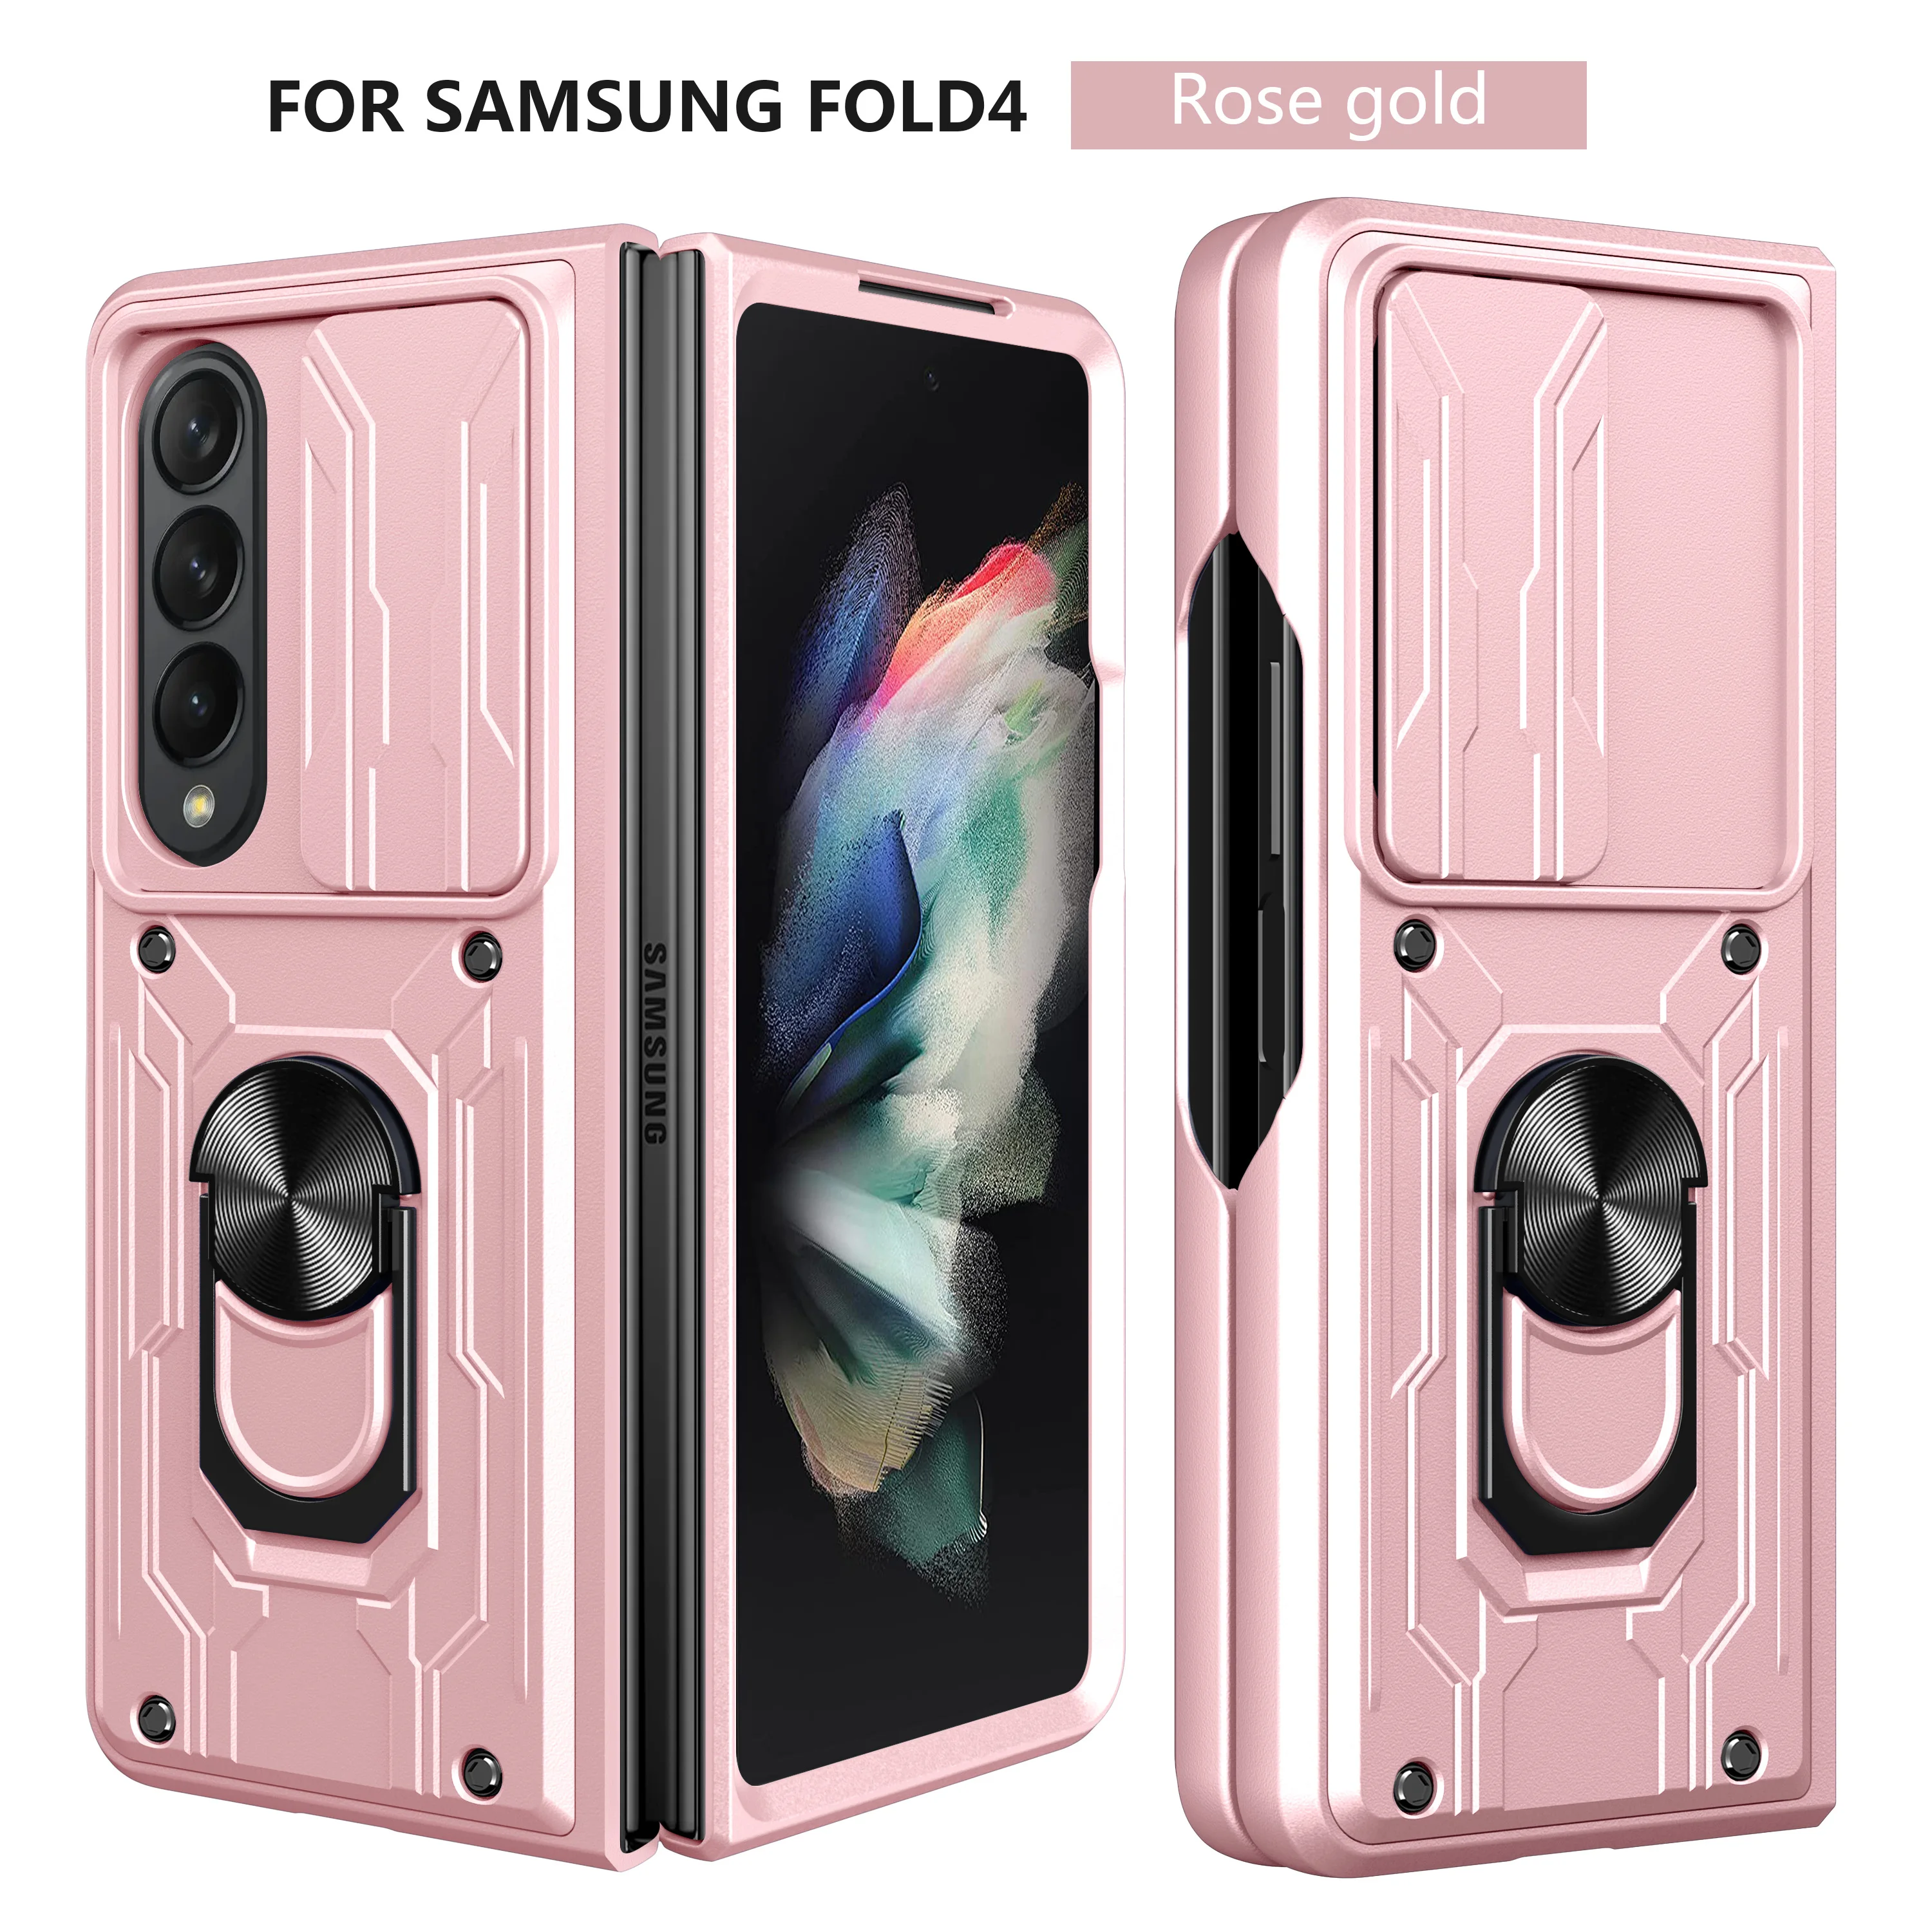 Luxury Armor Military-grade Metal Ring PC Hard Cover for samsung galaxy fold 4 phone case